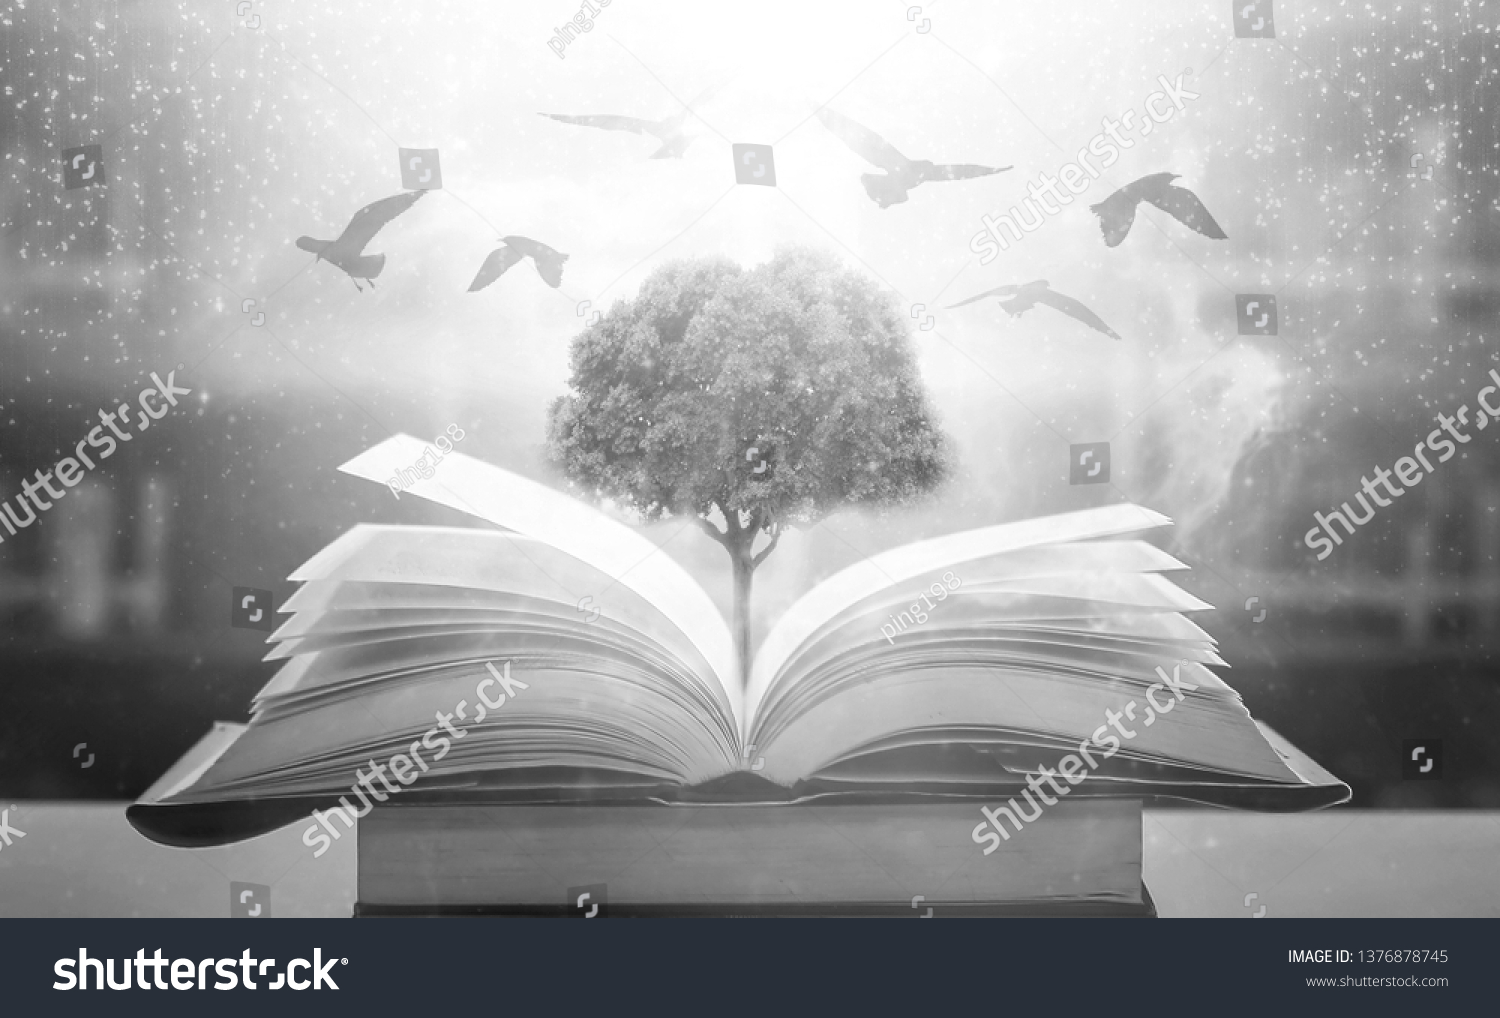 The concept of education by planting a tree of knowledge And birds that fly into the future In the opening of the old book in the library that contains the stack of textbooks that store the text  #1376878745